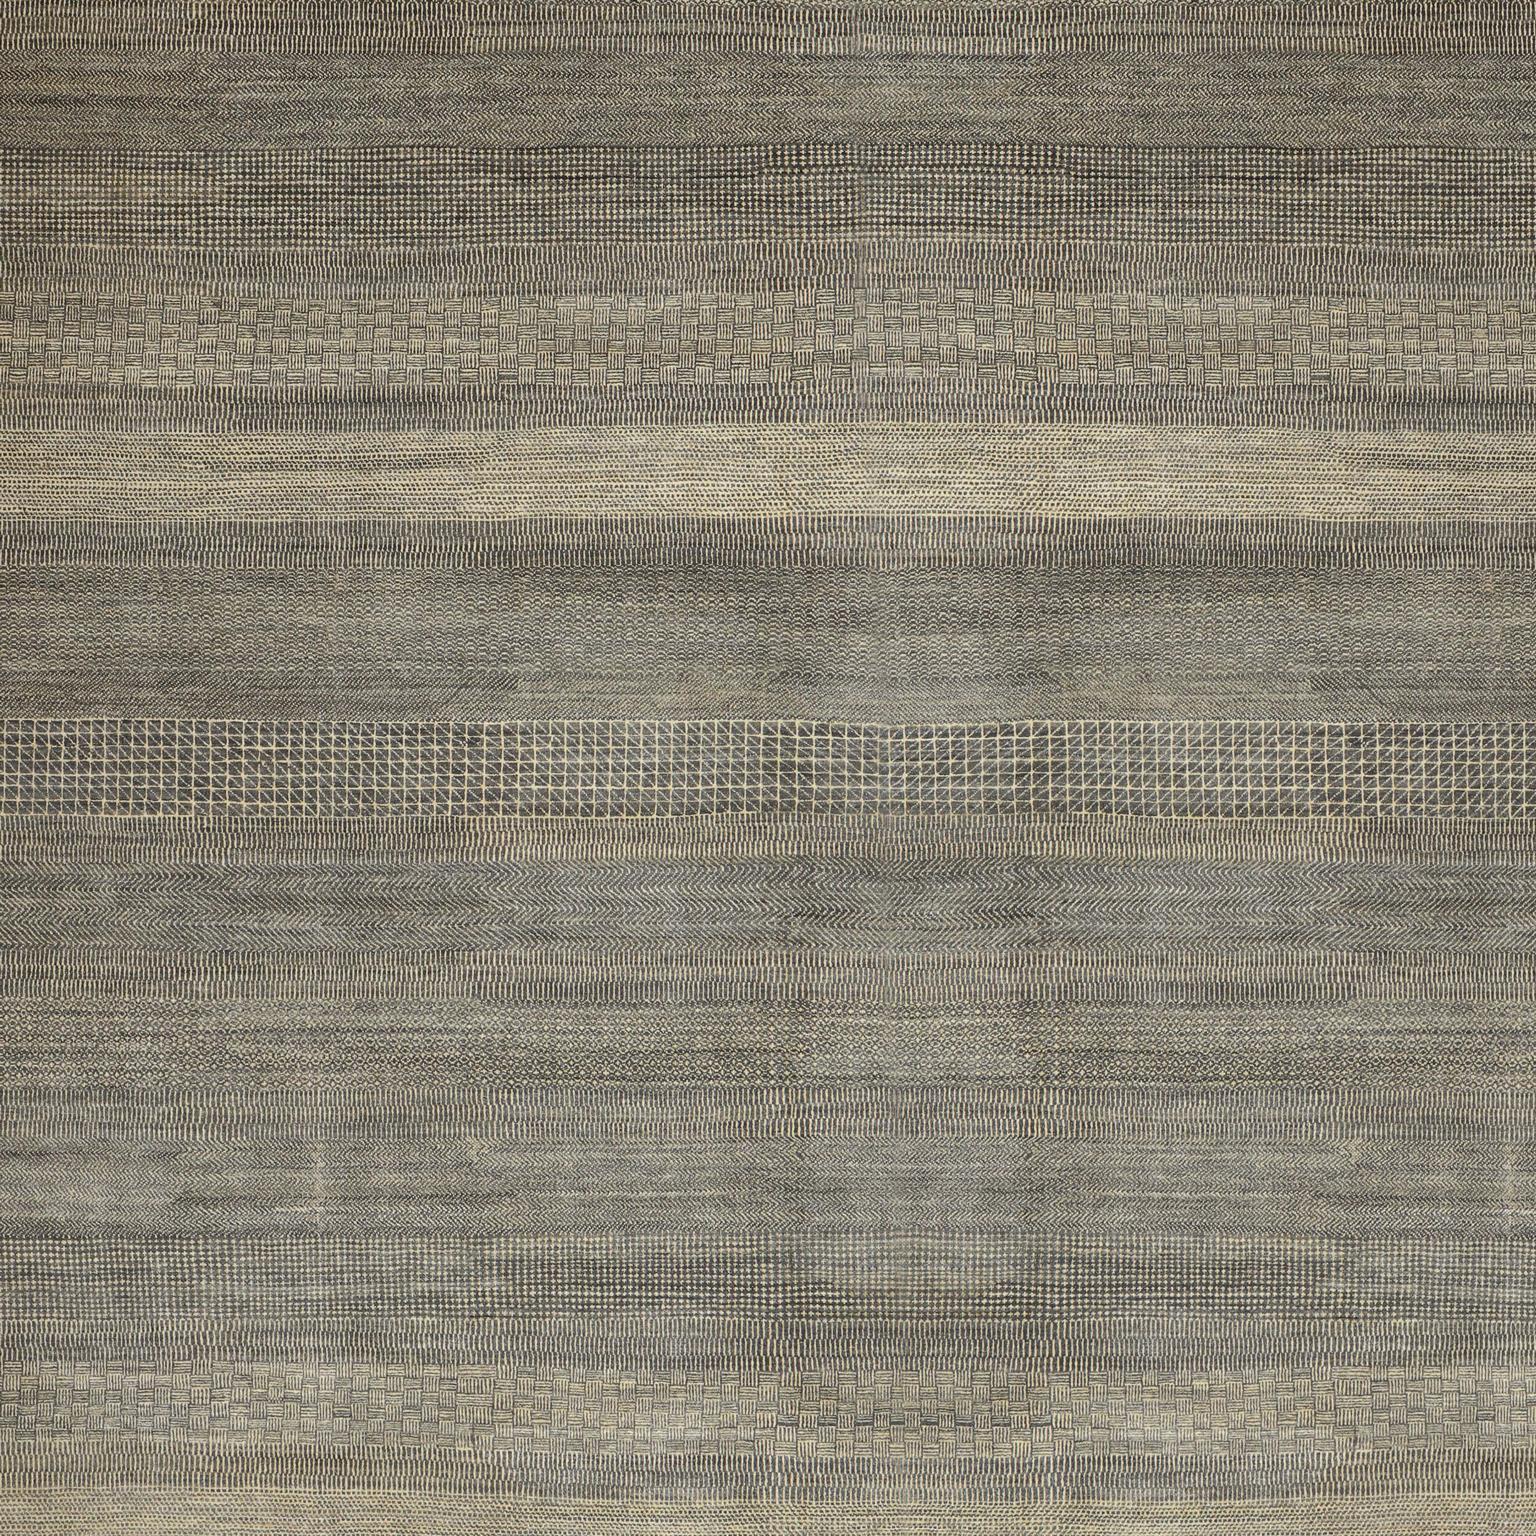 This 10’ x 13’11' Orley Shabahang signature “Rain” carpet showcases a modern design in a hand knotted Persian weave. This carpet, from the Orley Shabahang Rain collection, features a simple pattern made from pure handspun wool and organic dyes that